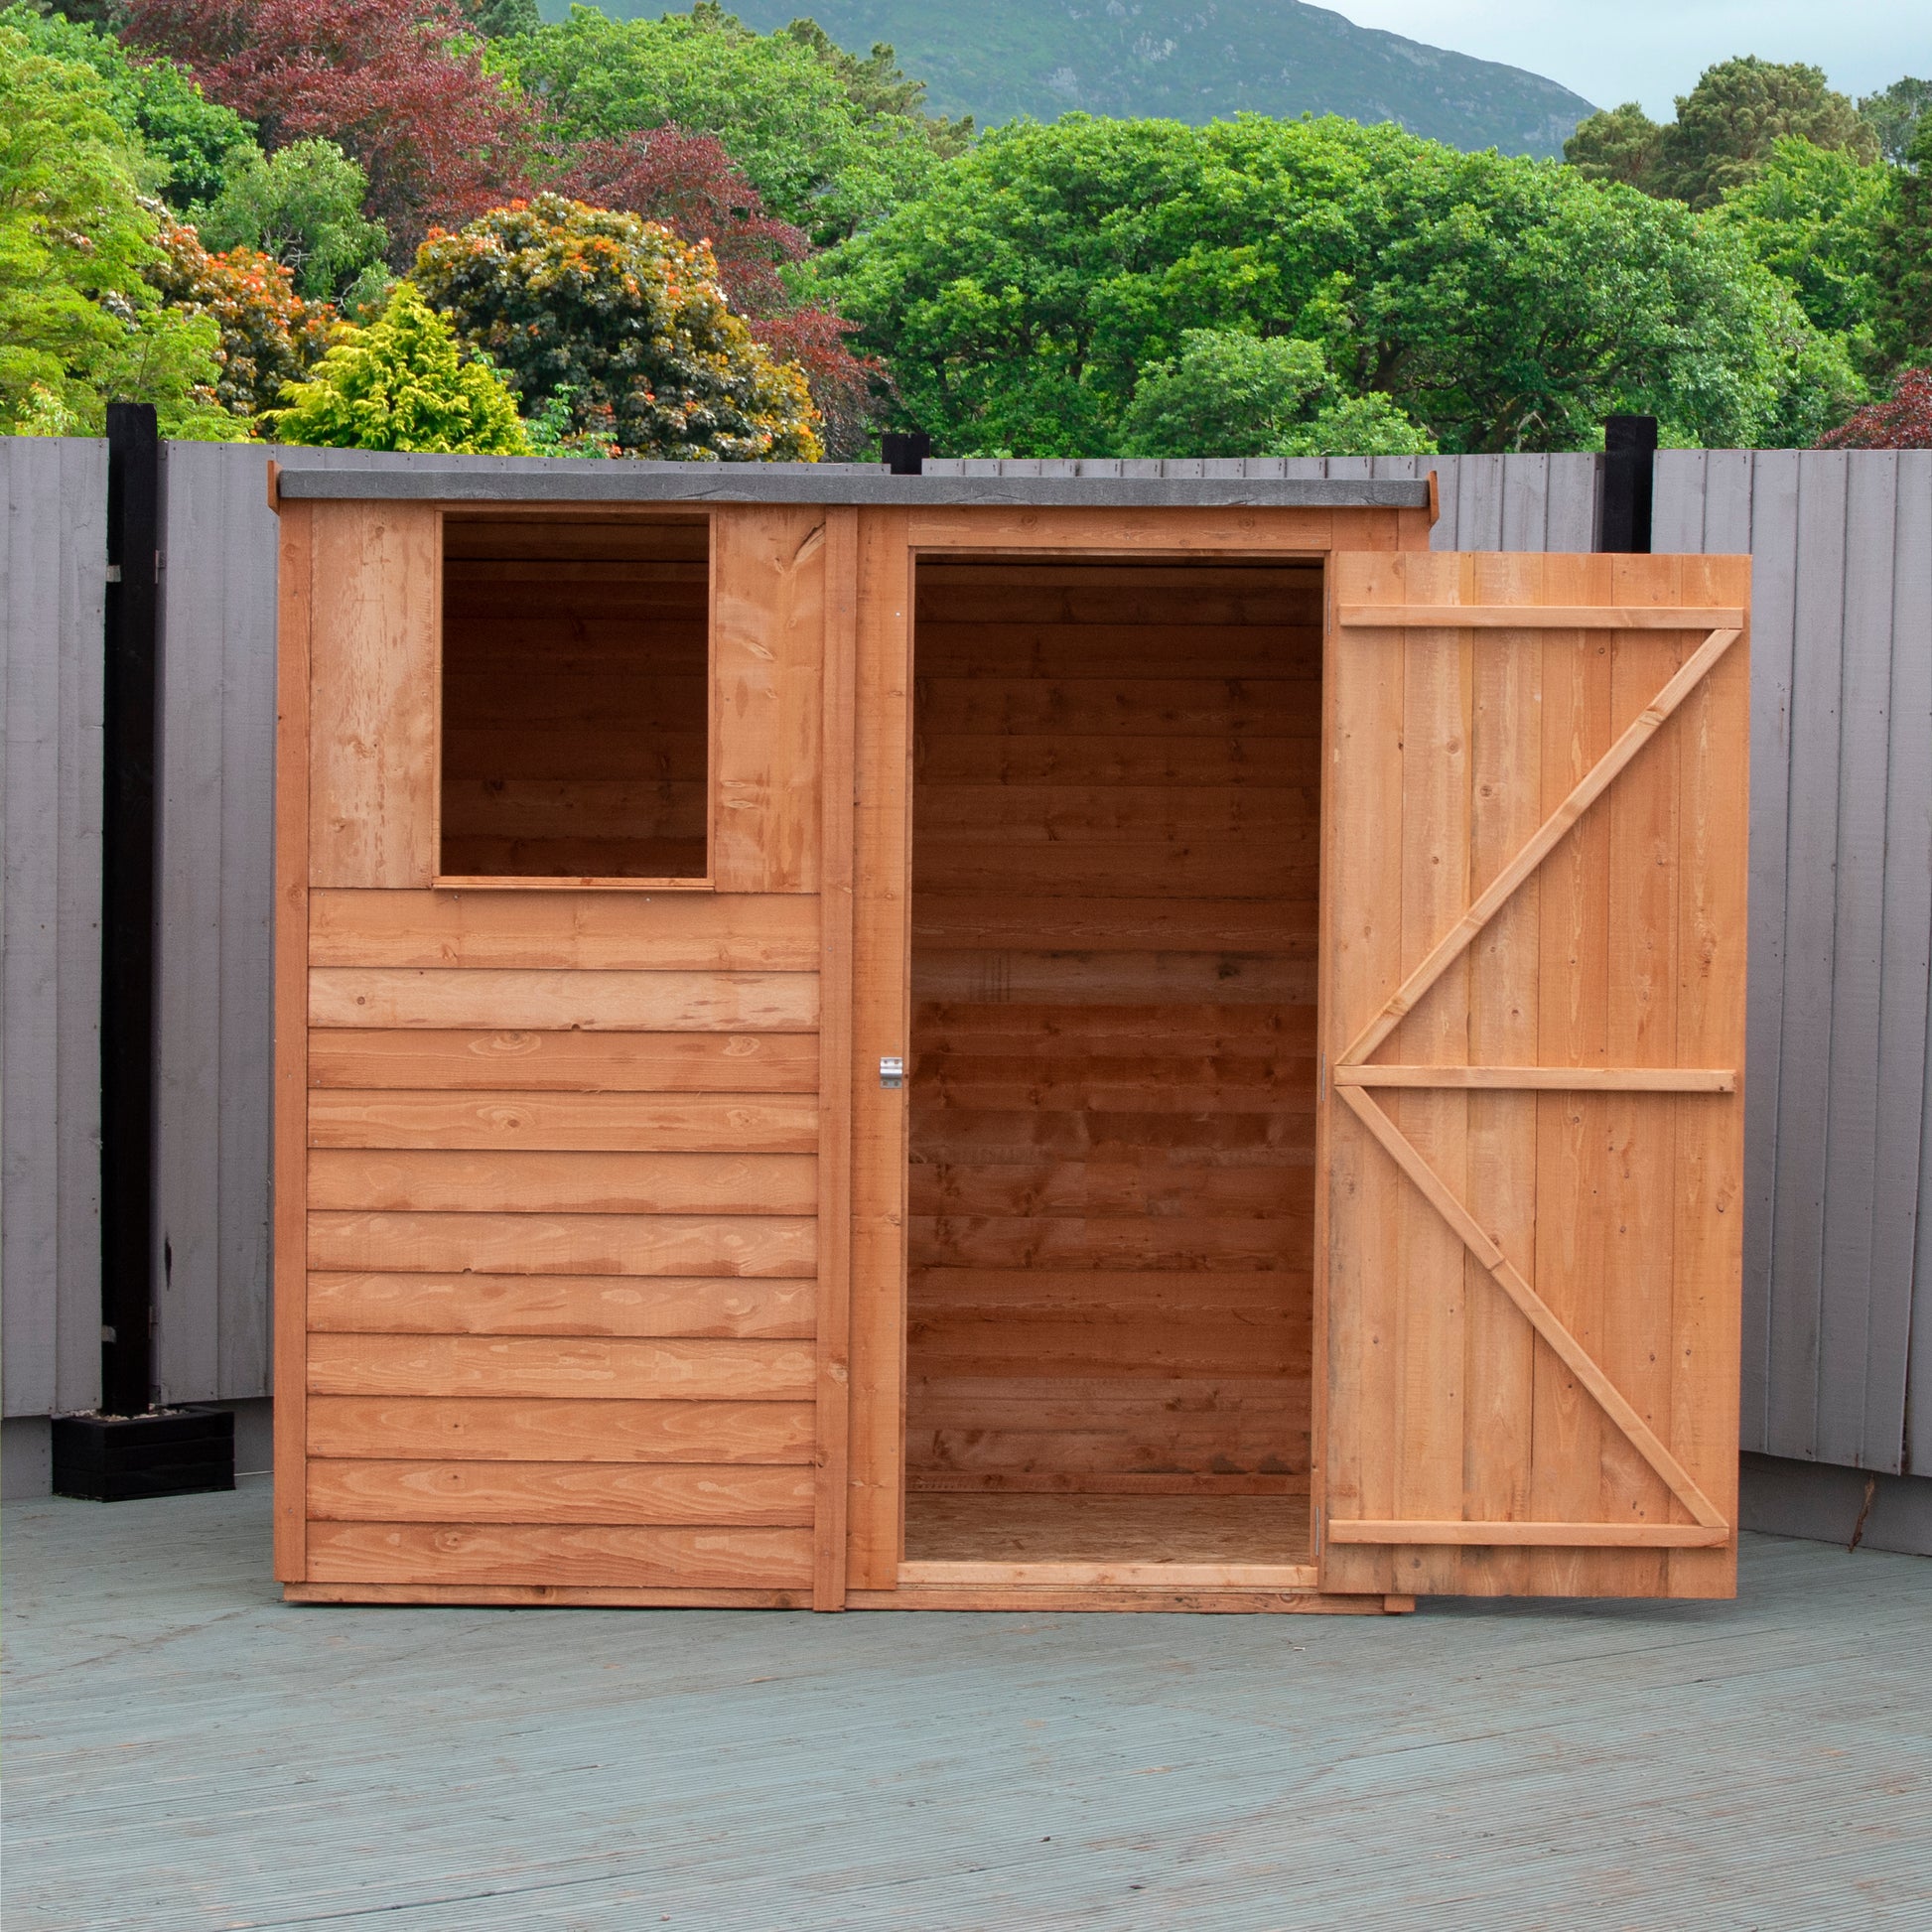 Shire 6 x 4 Dip Treated Overlap Shed Pent - Premium Garden